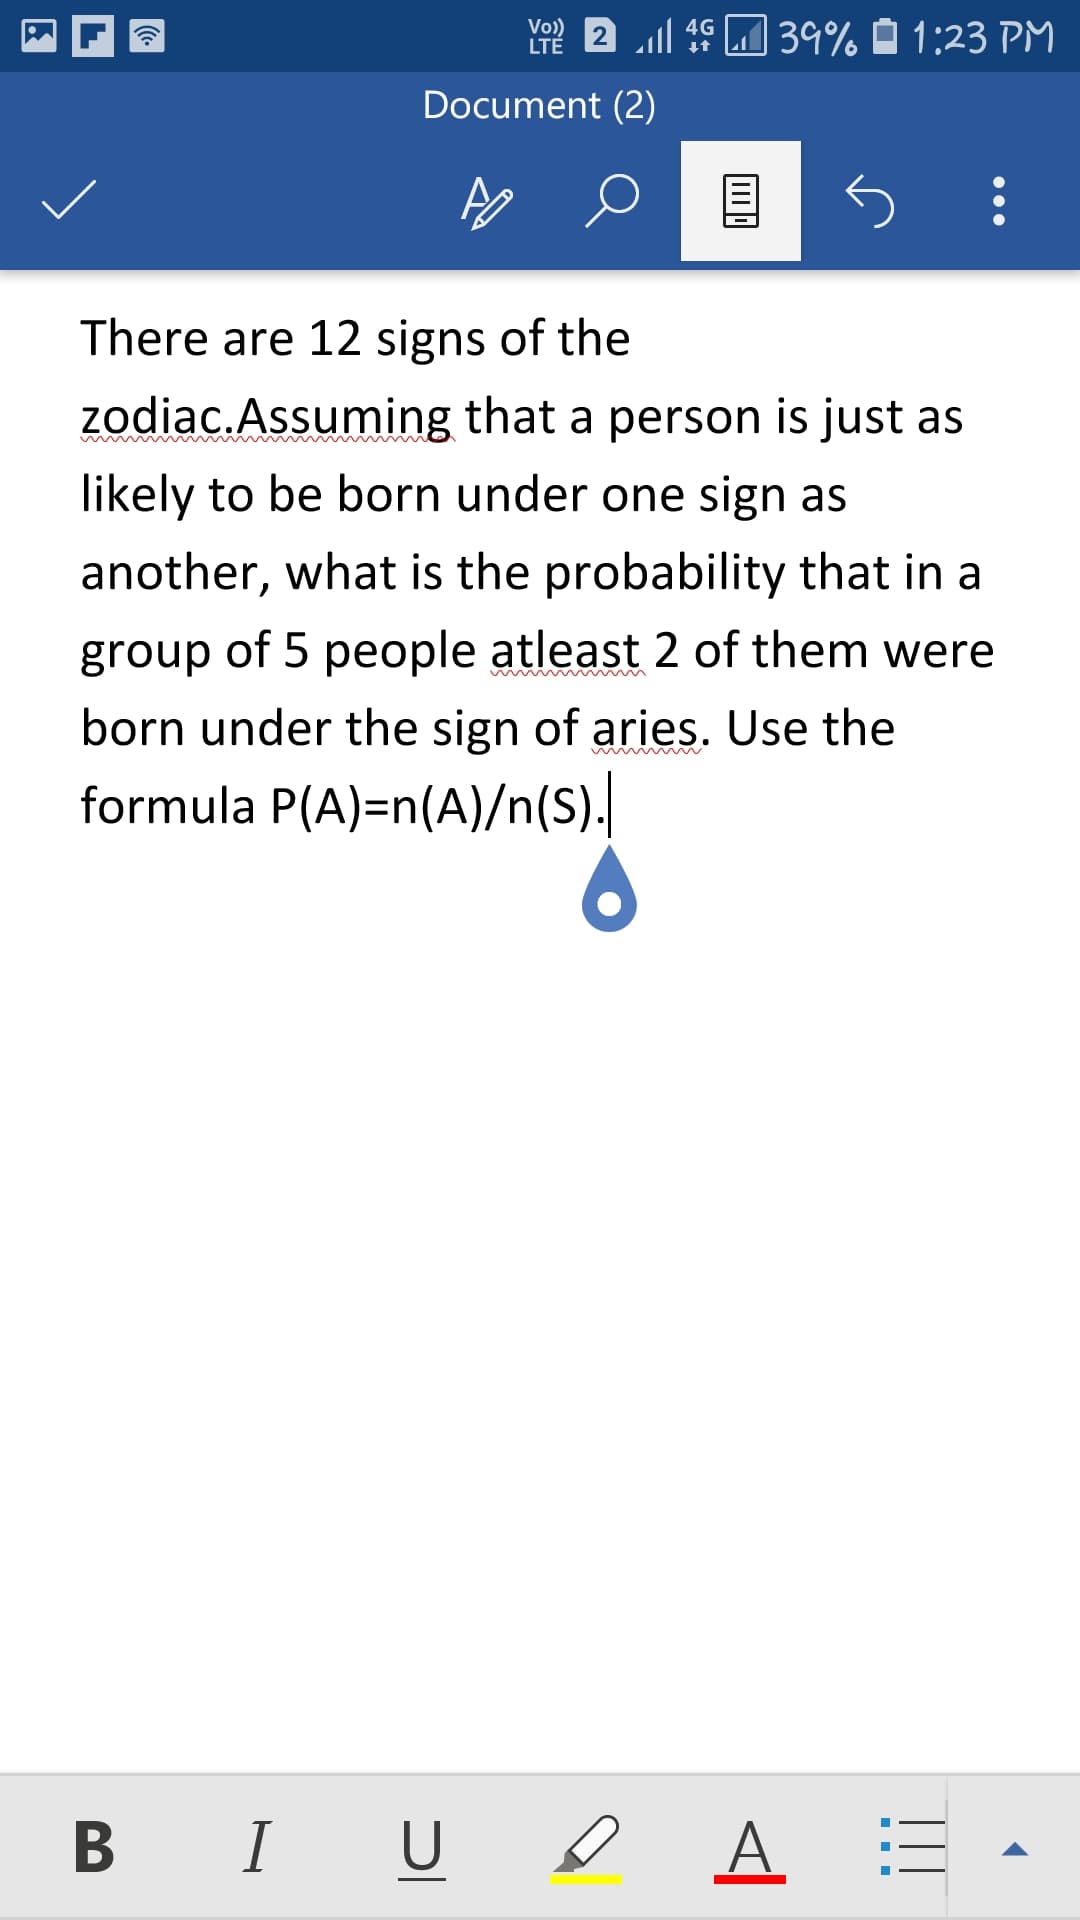 There are 12 signs of the
zodiac.Assuming that a person is just as
likely to be born under one sign as
another, what is the probability that in a
group of 5 people atleast 2 of them were
